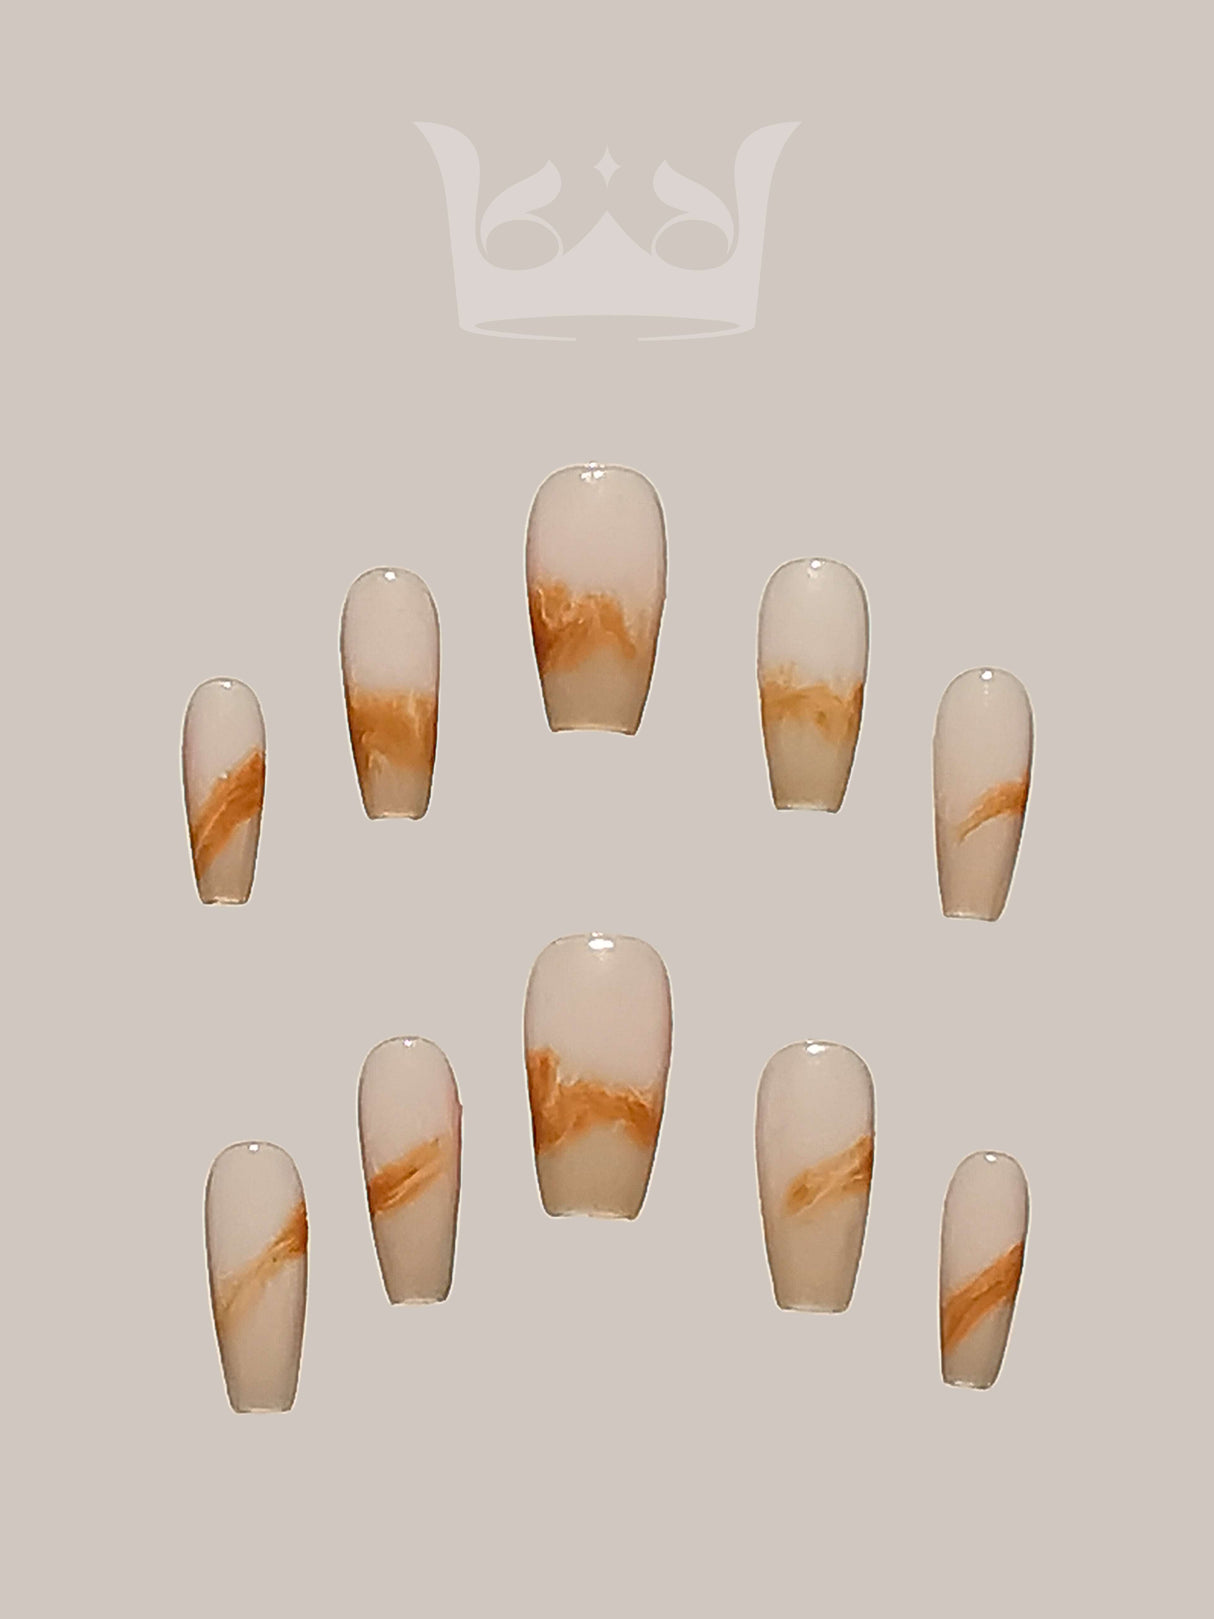 These press-on nails includes a marbled effect with swirls of white and shades of brown or tan, a symmetrical pattern. They are styled in a coffin or ballerina nail shape.